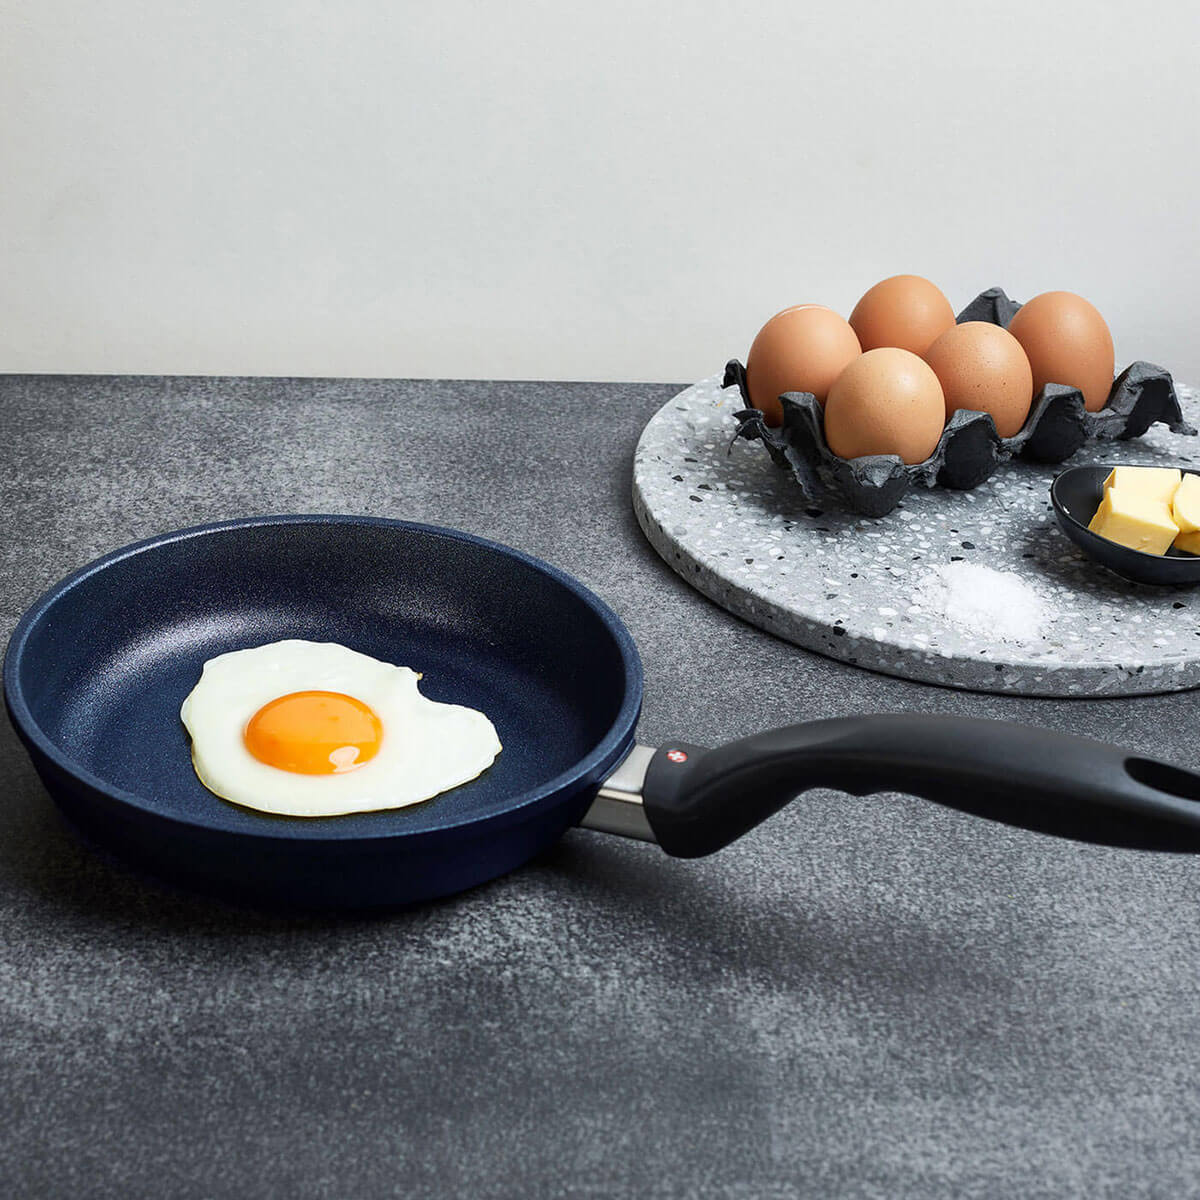 fry pan in use with sunny side up egg on kitchen counter